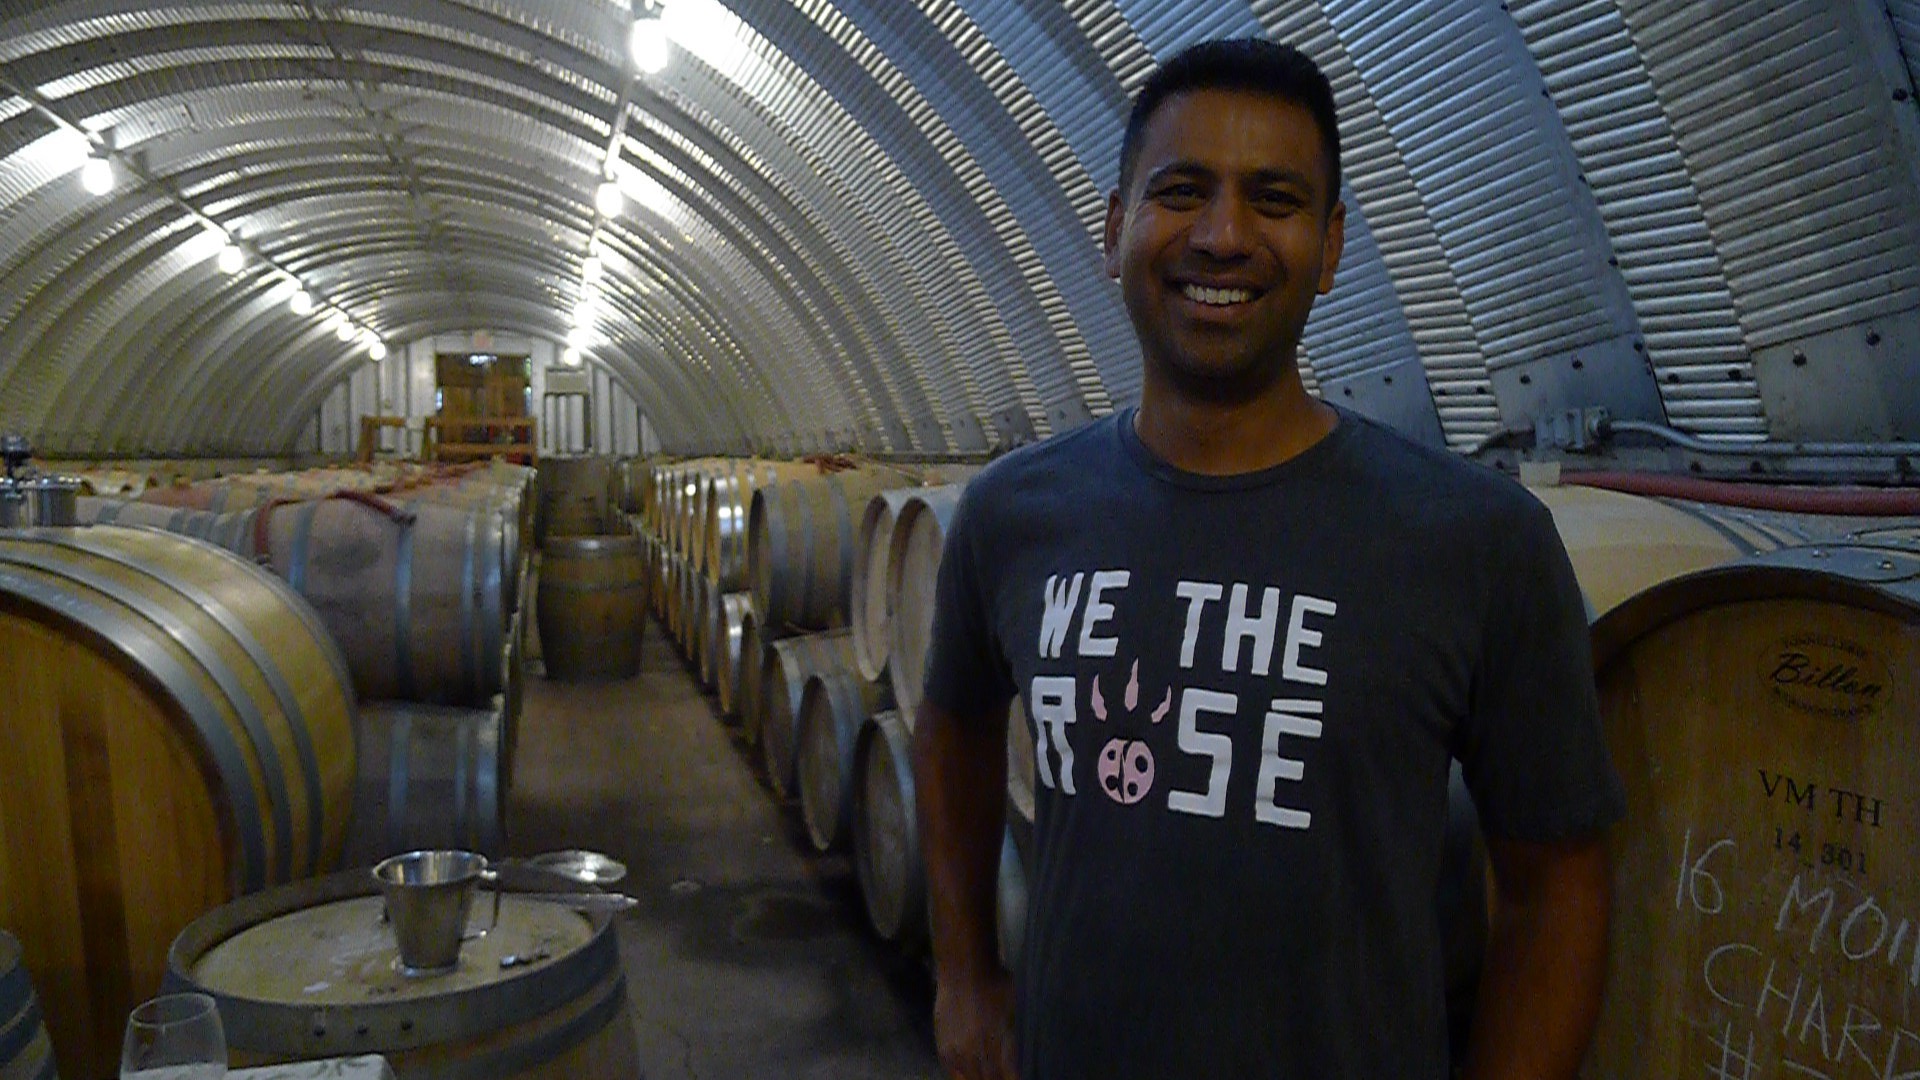 Winemaker Shiraz Mottiar at home in his barrel cellar at Malivoire... and he's looking pretty happy about the 2016 vintage thus far.